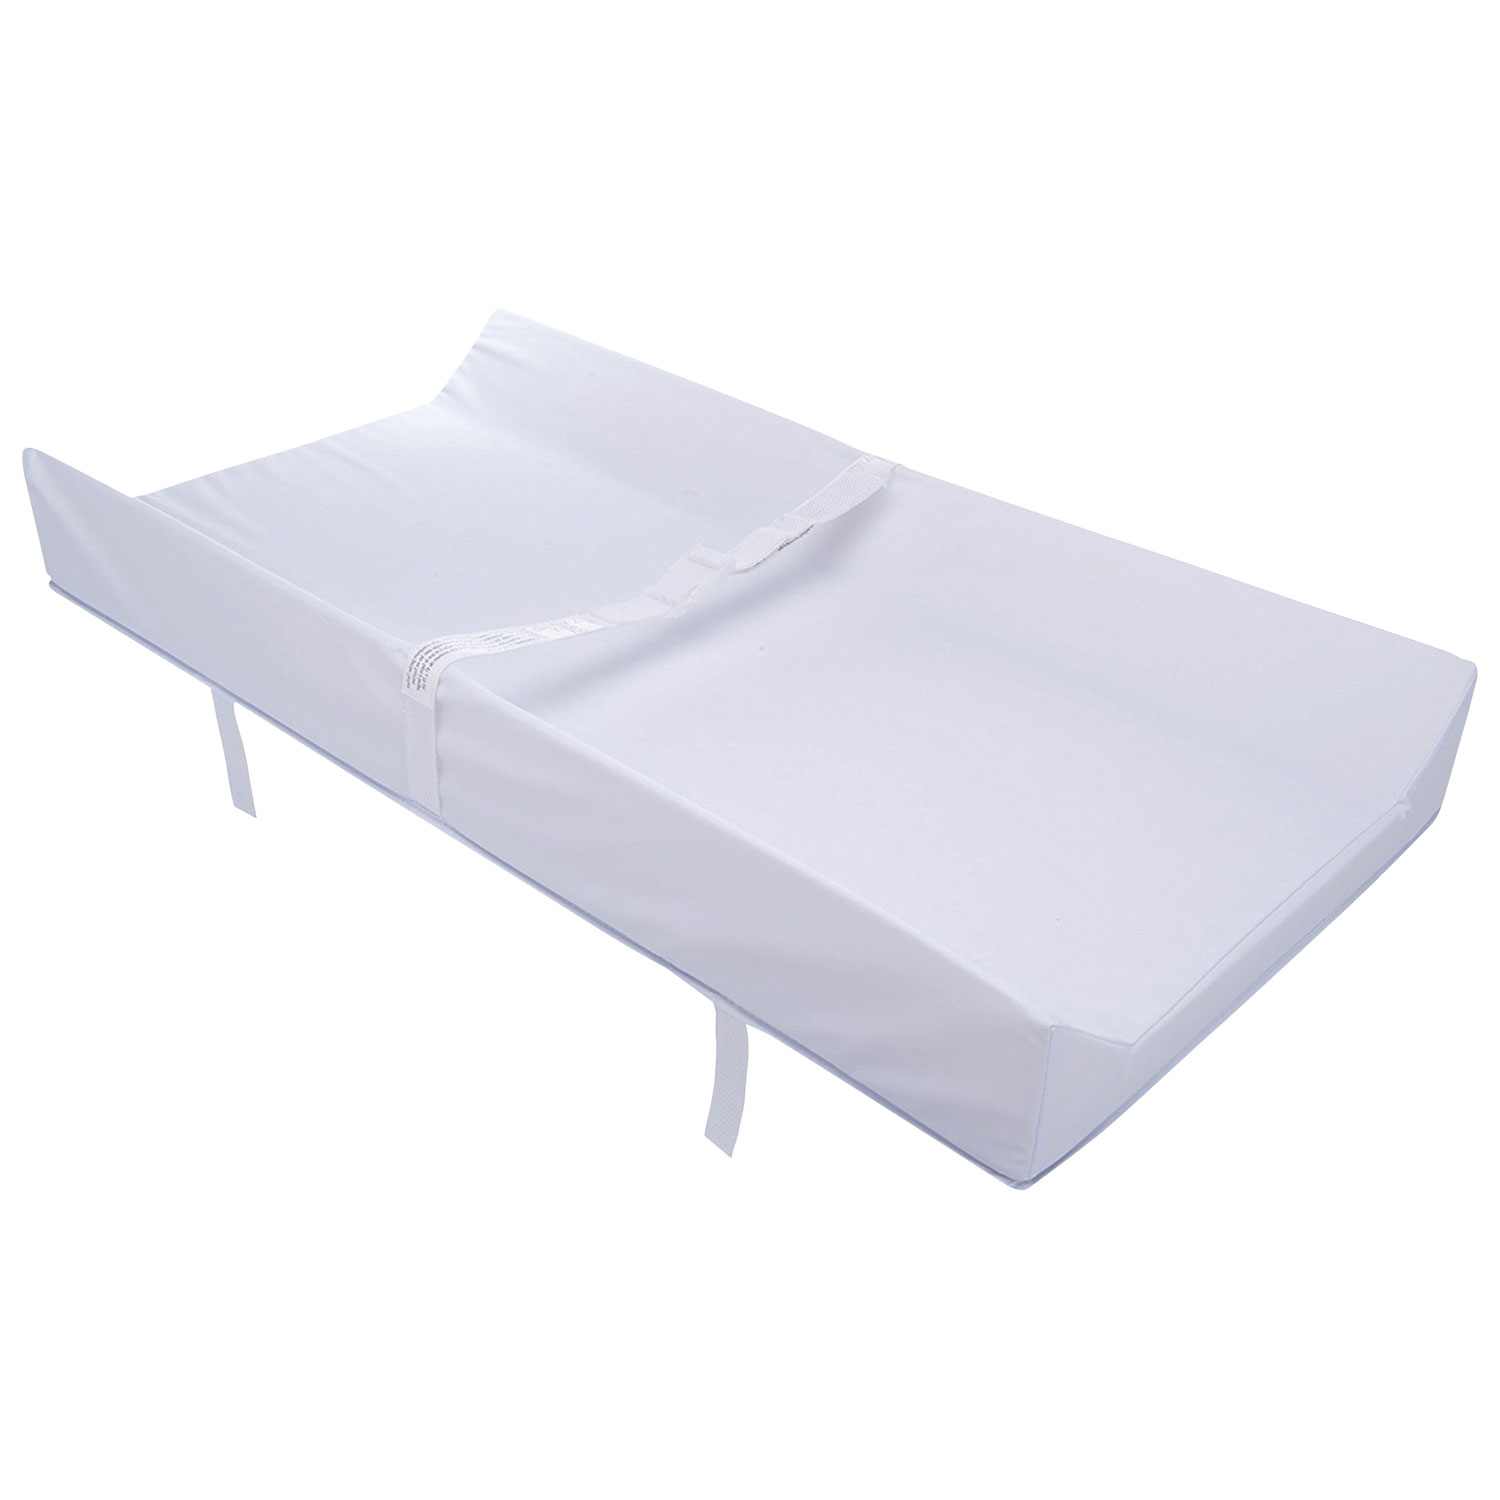 Simmons Contoured Changing Pad - White Cover